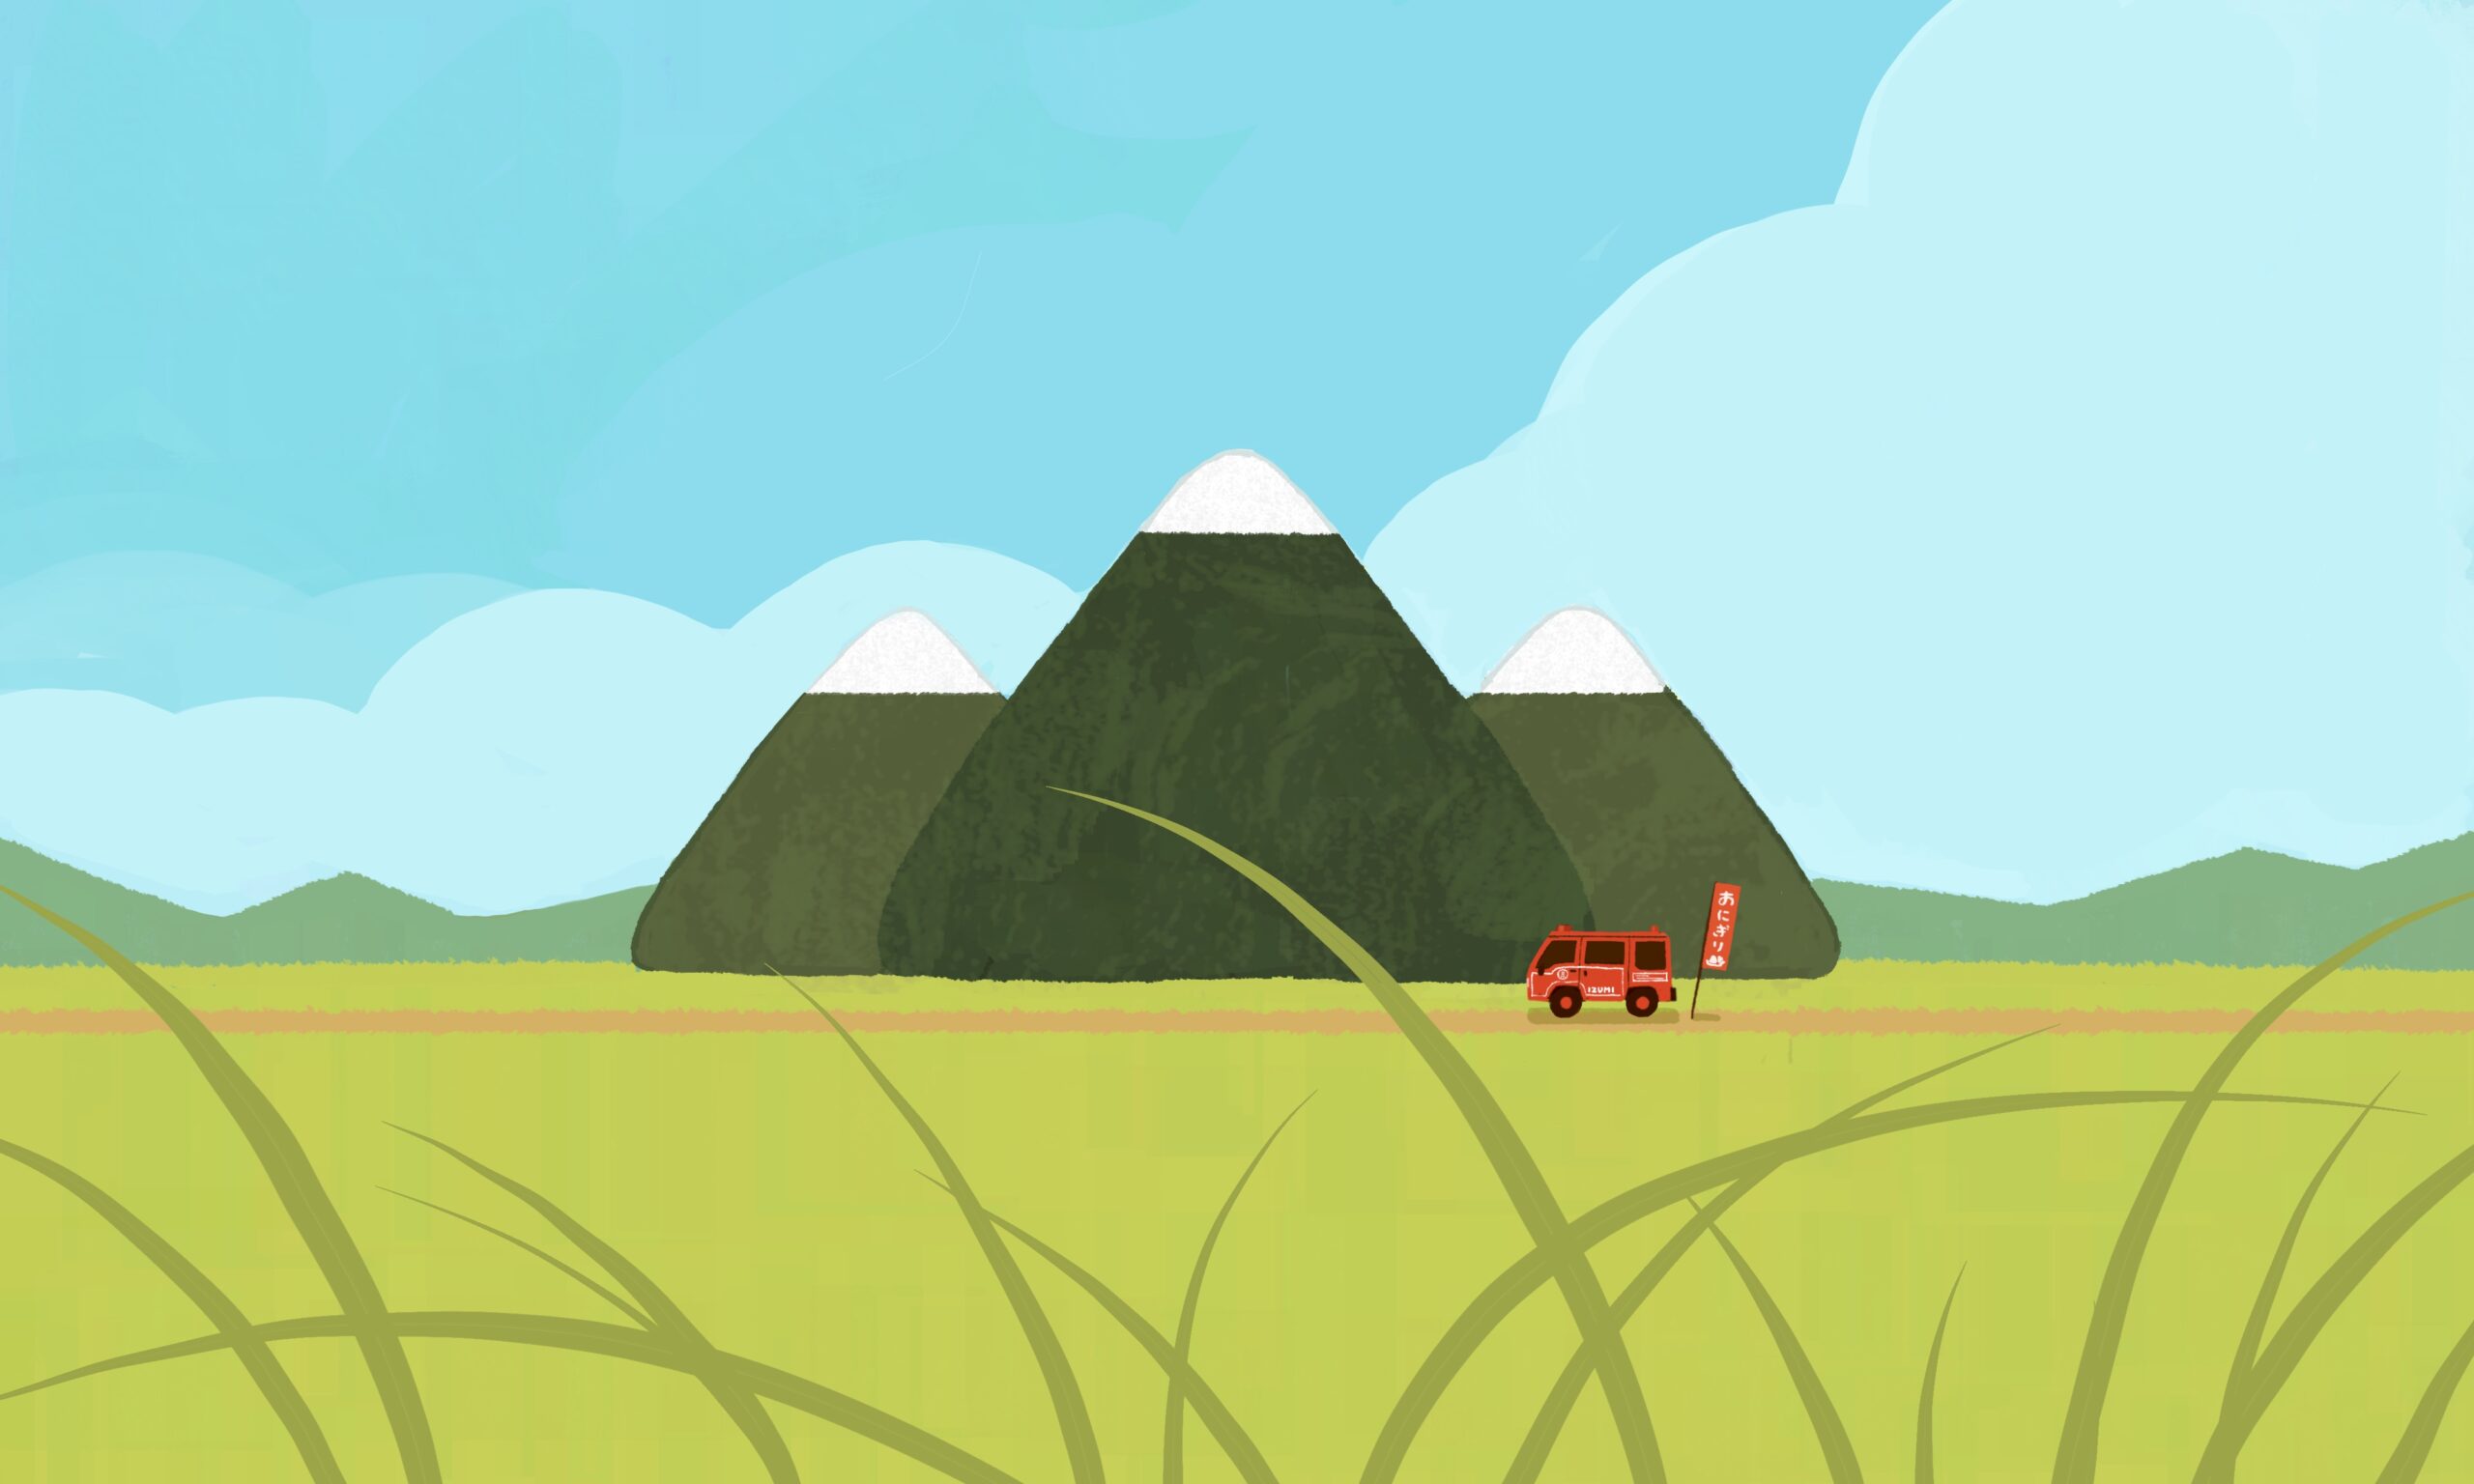 Three giant onigiris sit in the center of a grassy landscape. A far off mountain range and large clouds into the distance of a bright blue sky. A Japanese fire truck with the words Izumi written on it sits on a road in front of the onigiris.